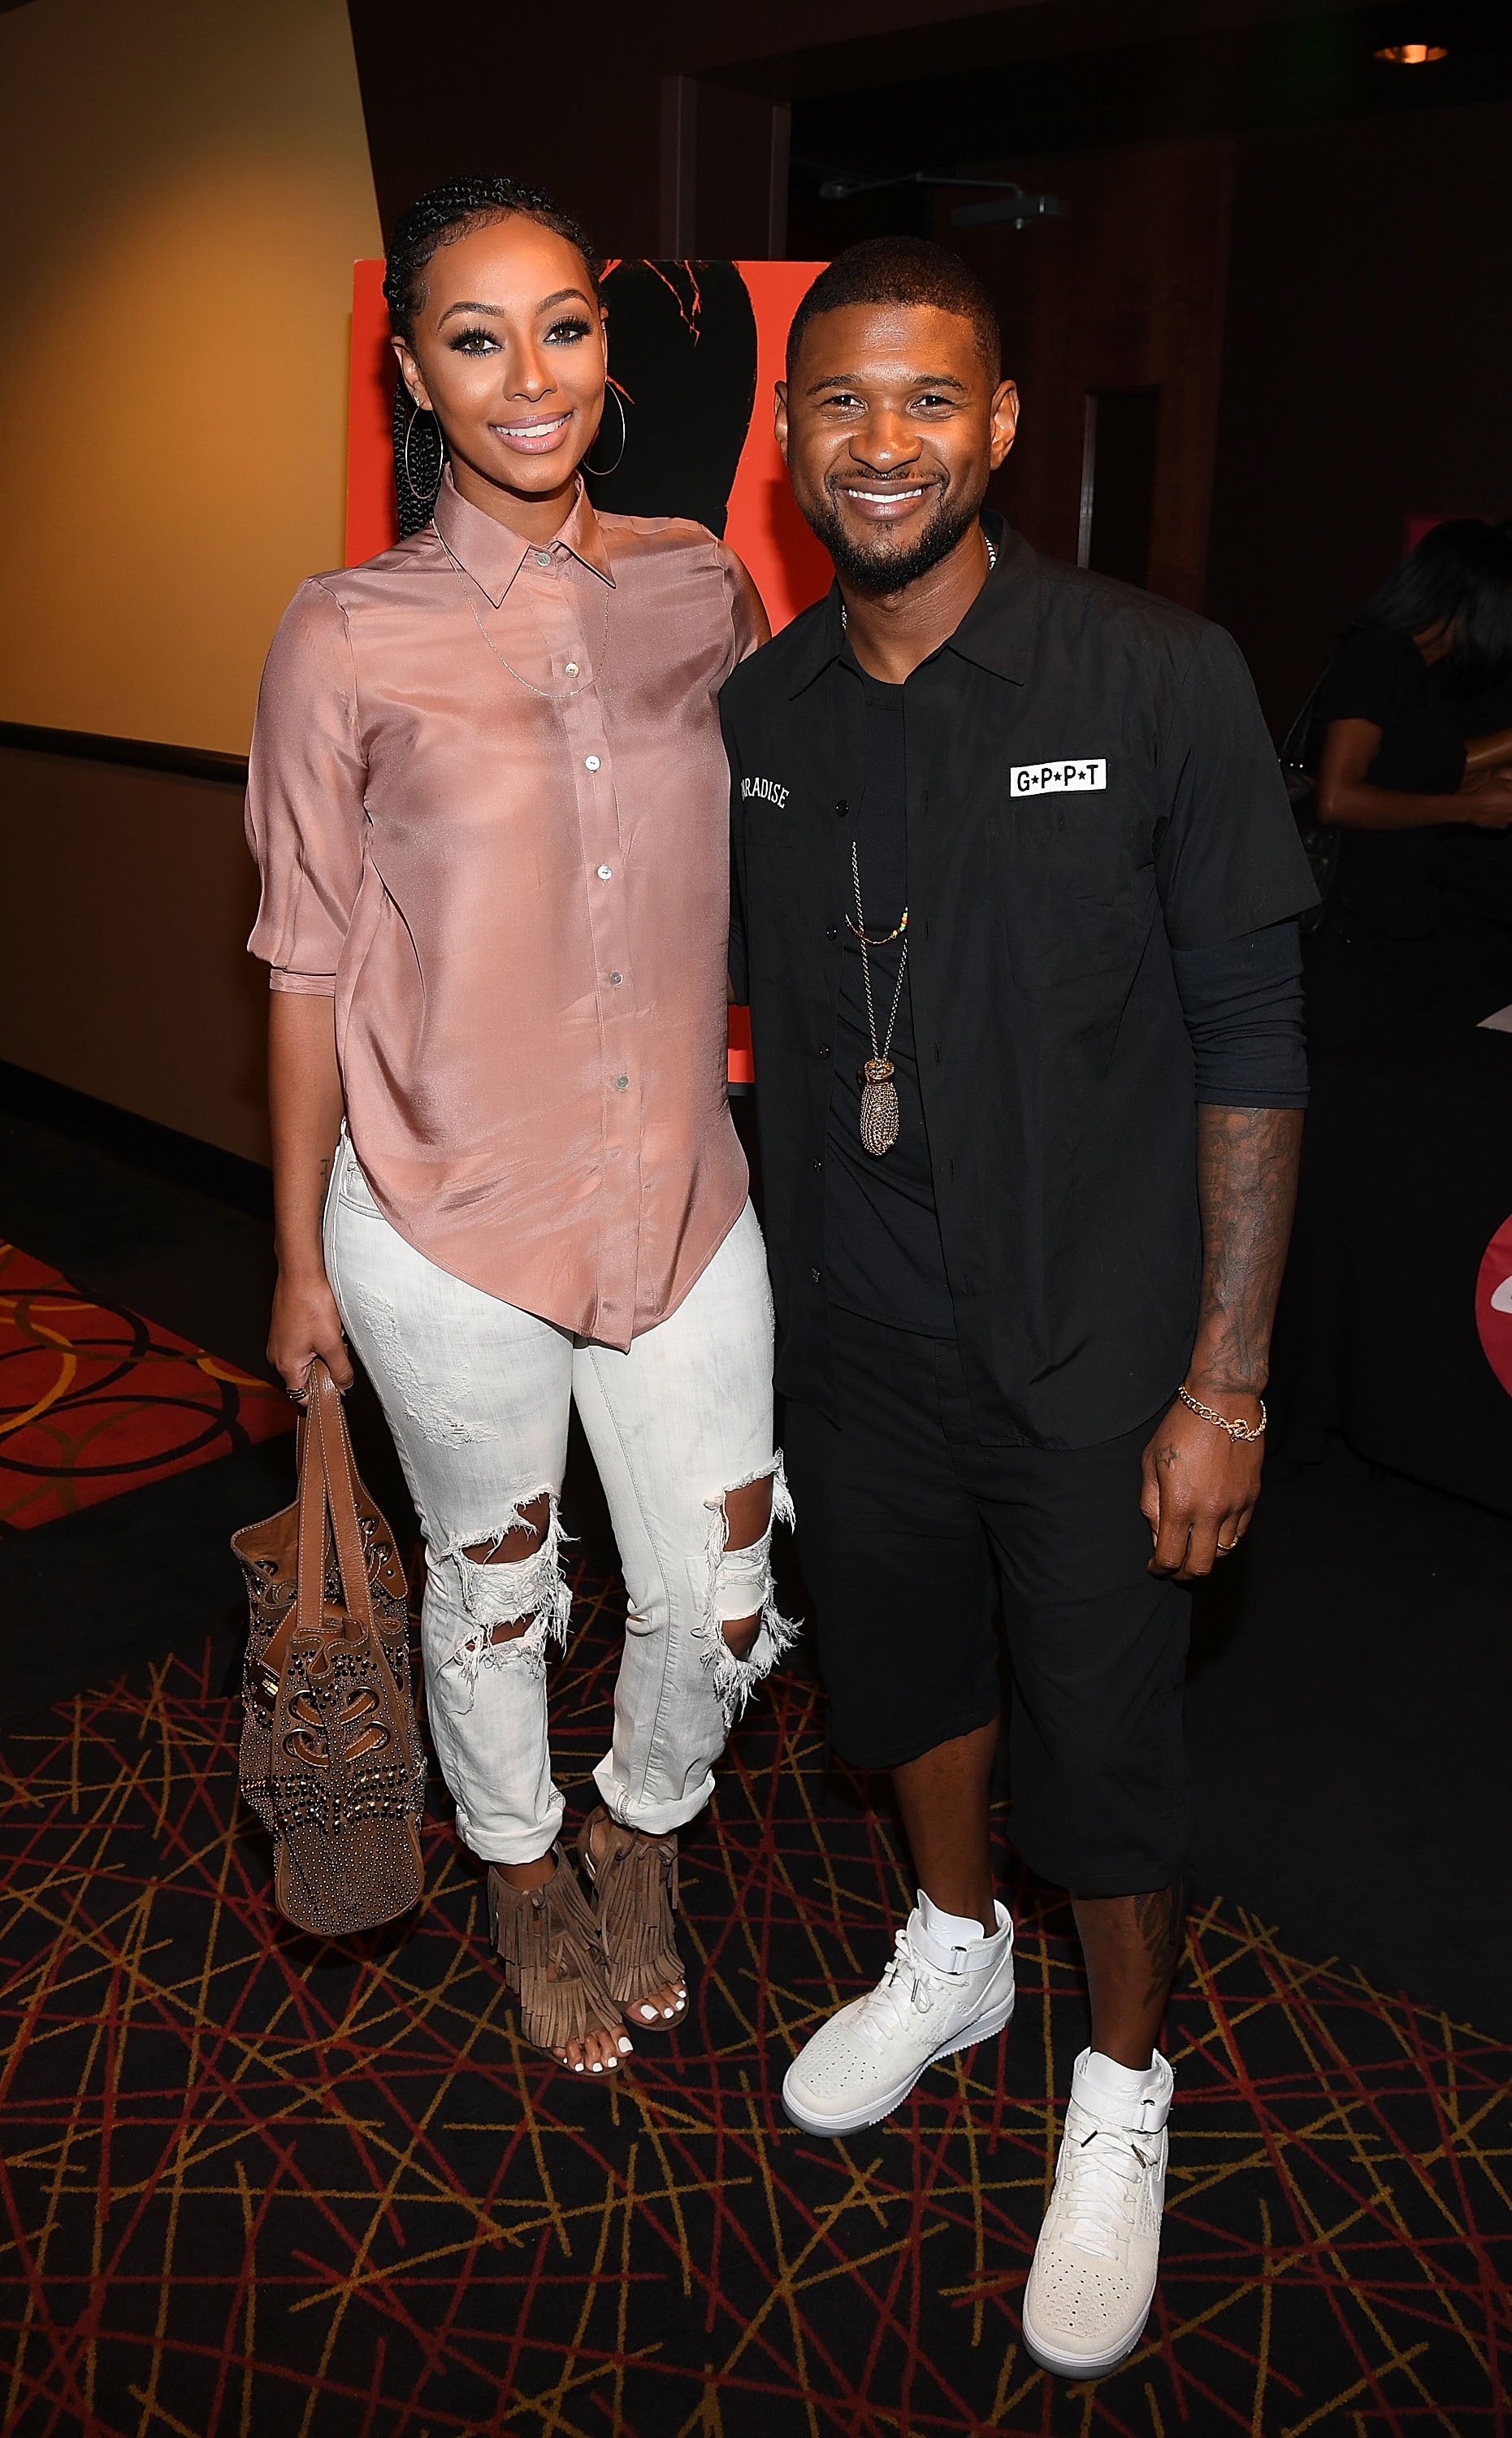 Beyonce & Jay Z, Tia Mowry, The Game and More!
